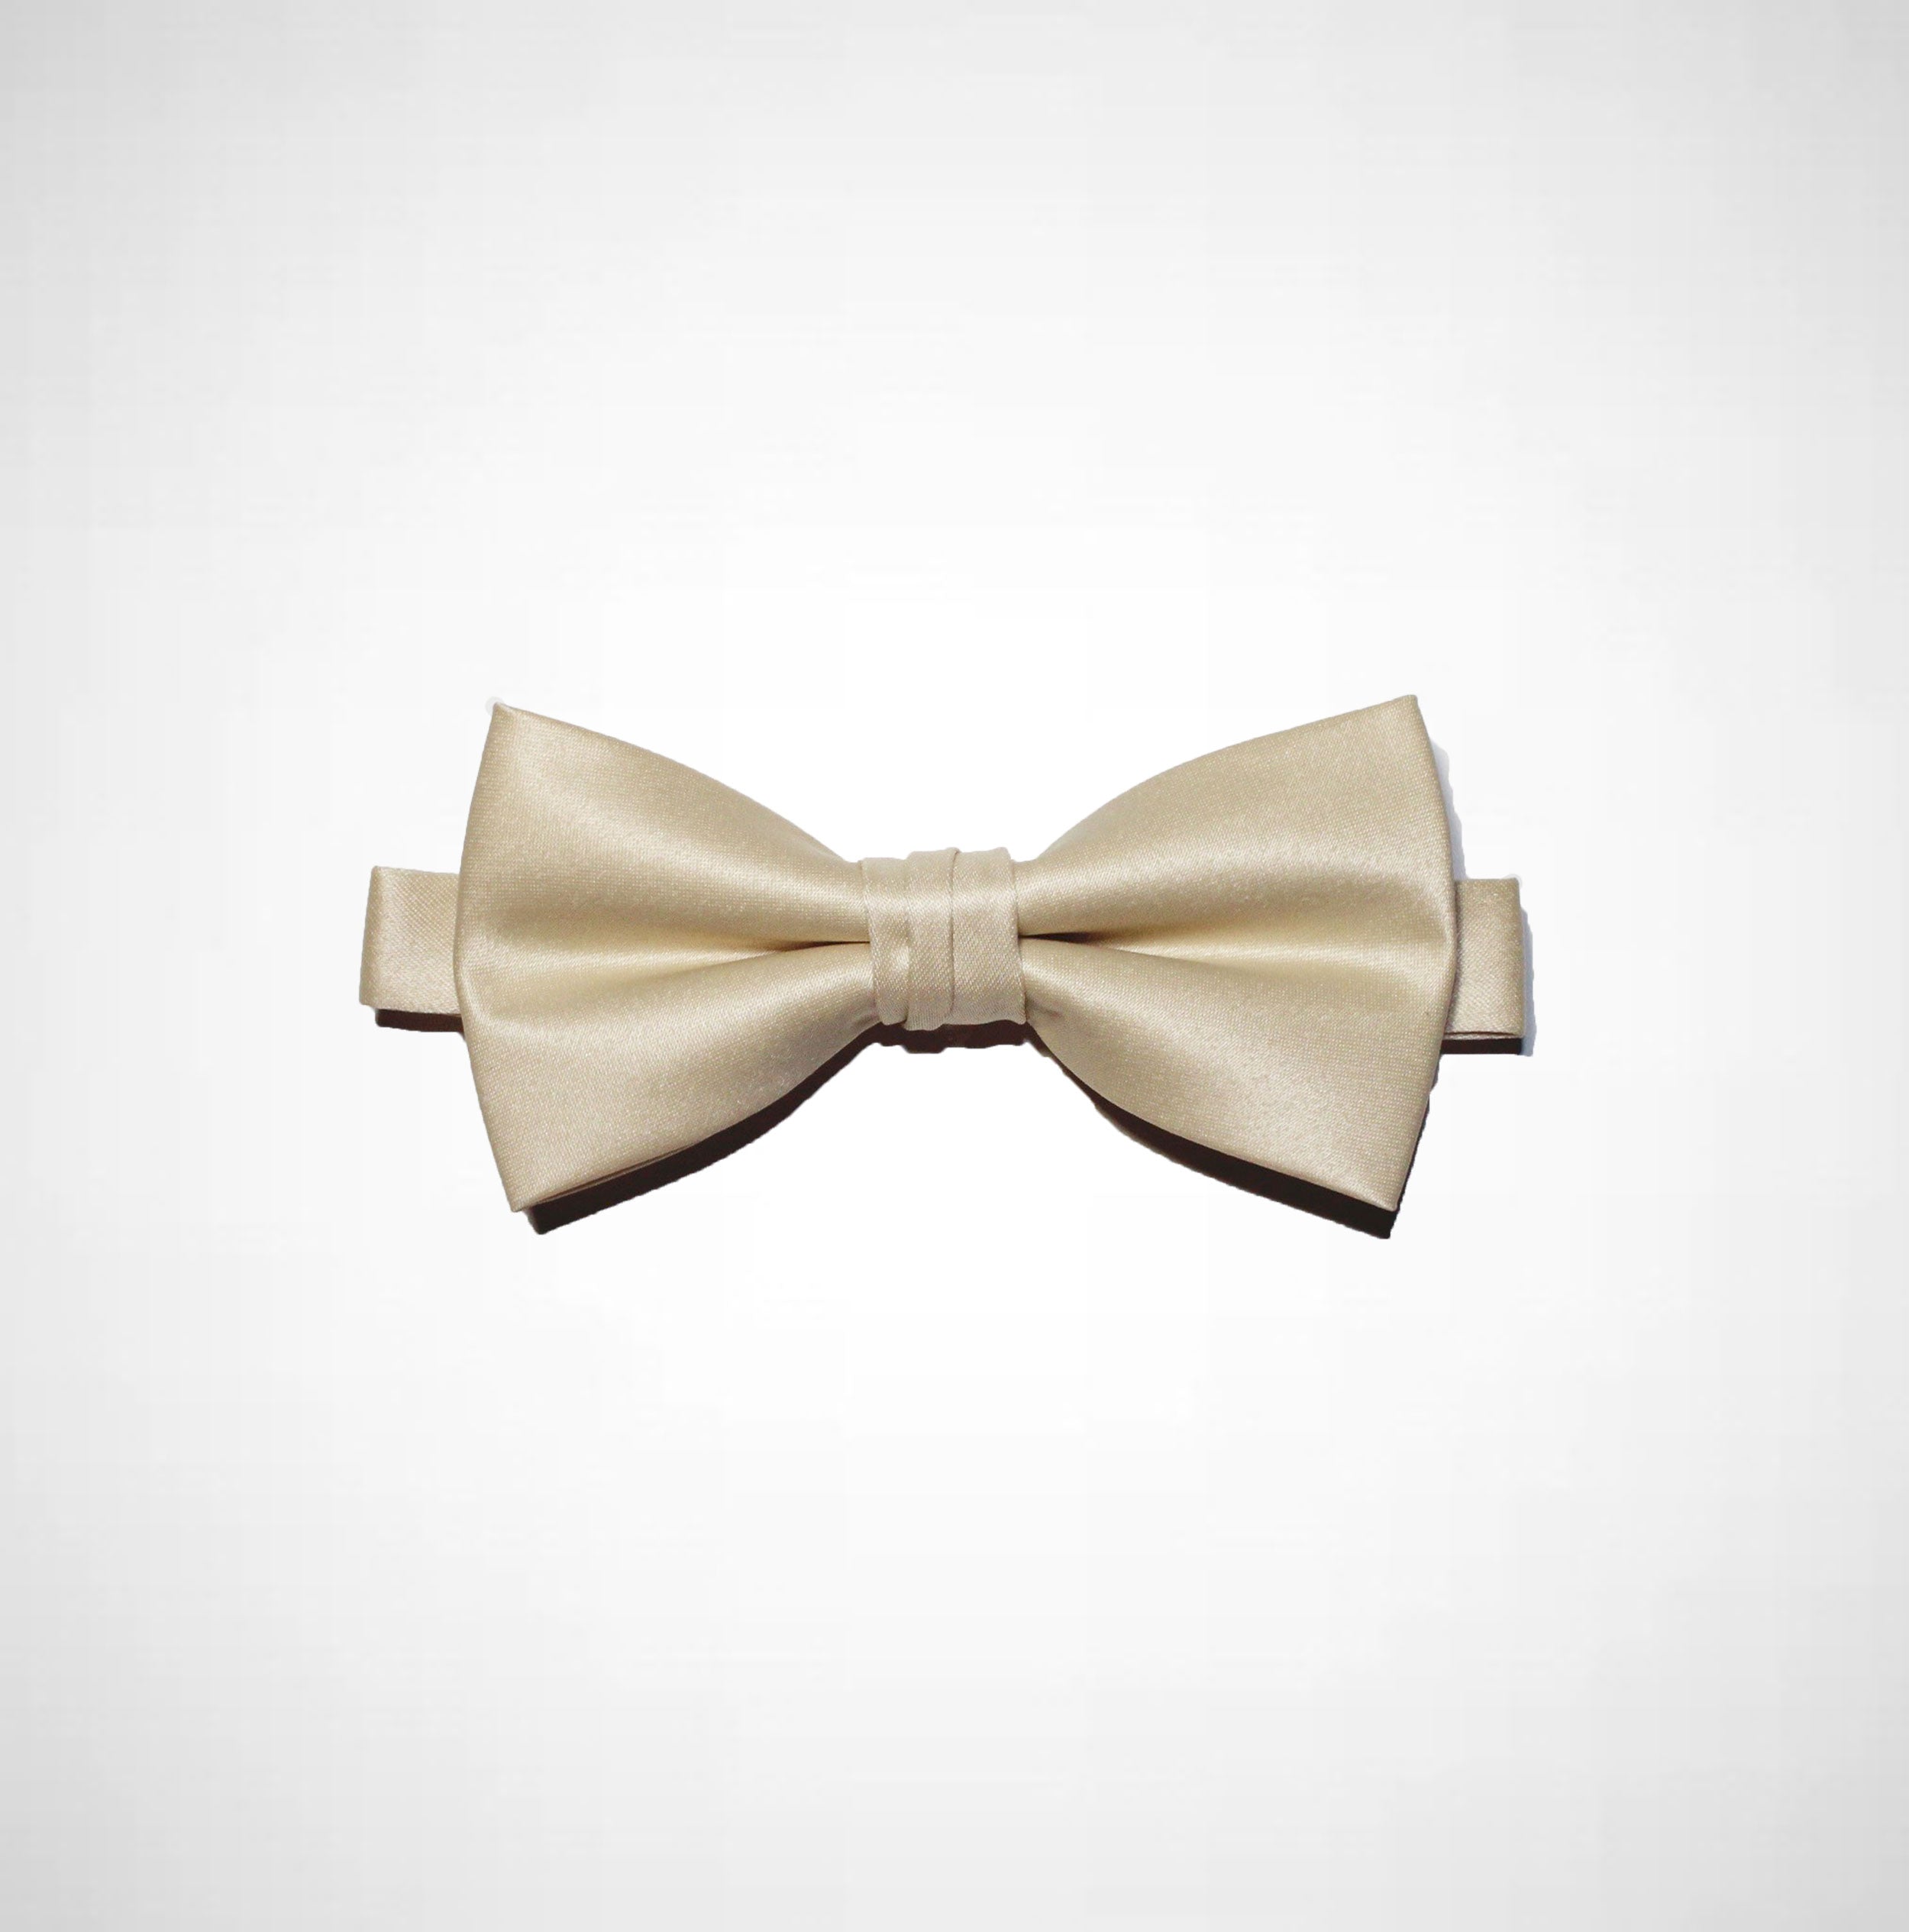 Champagne Poly/Satin Bow Tie - Women’s Tuxedo Suits | girls prom tuxedo | gal tux | Wedding Party, Bridesmaids